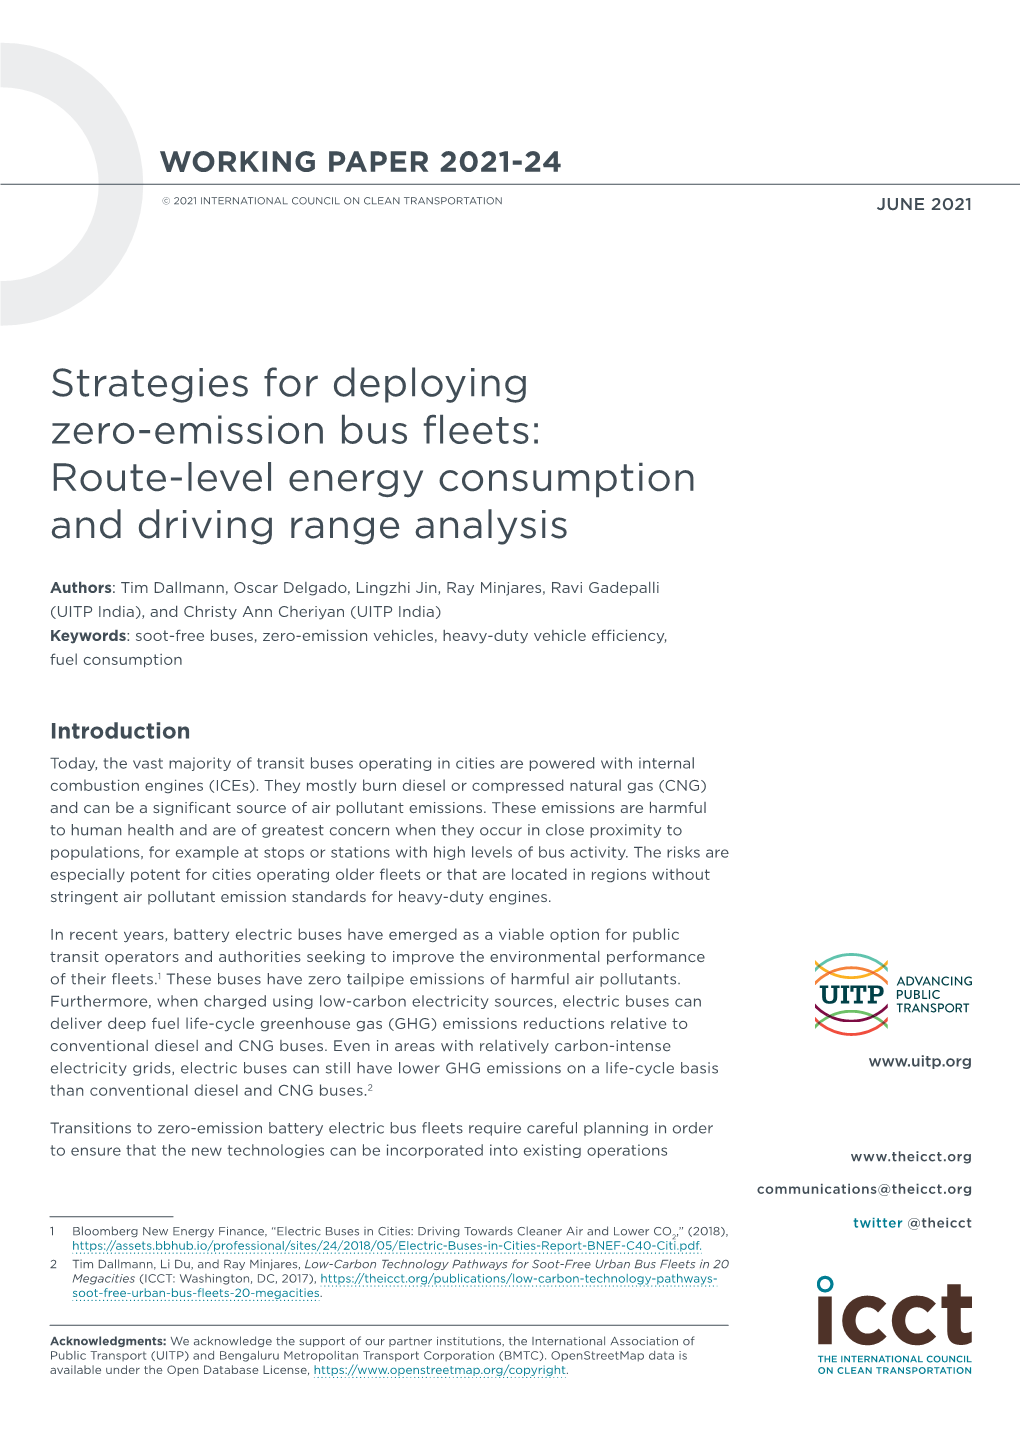 Strategies for Deploying Zero-Emission Bus Fleets: Route-Level Energy Consumption and Driving Range Analysis